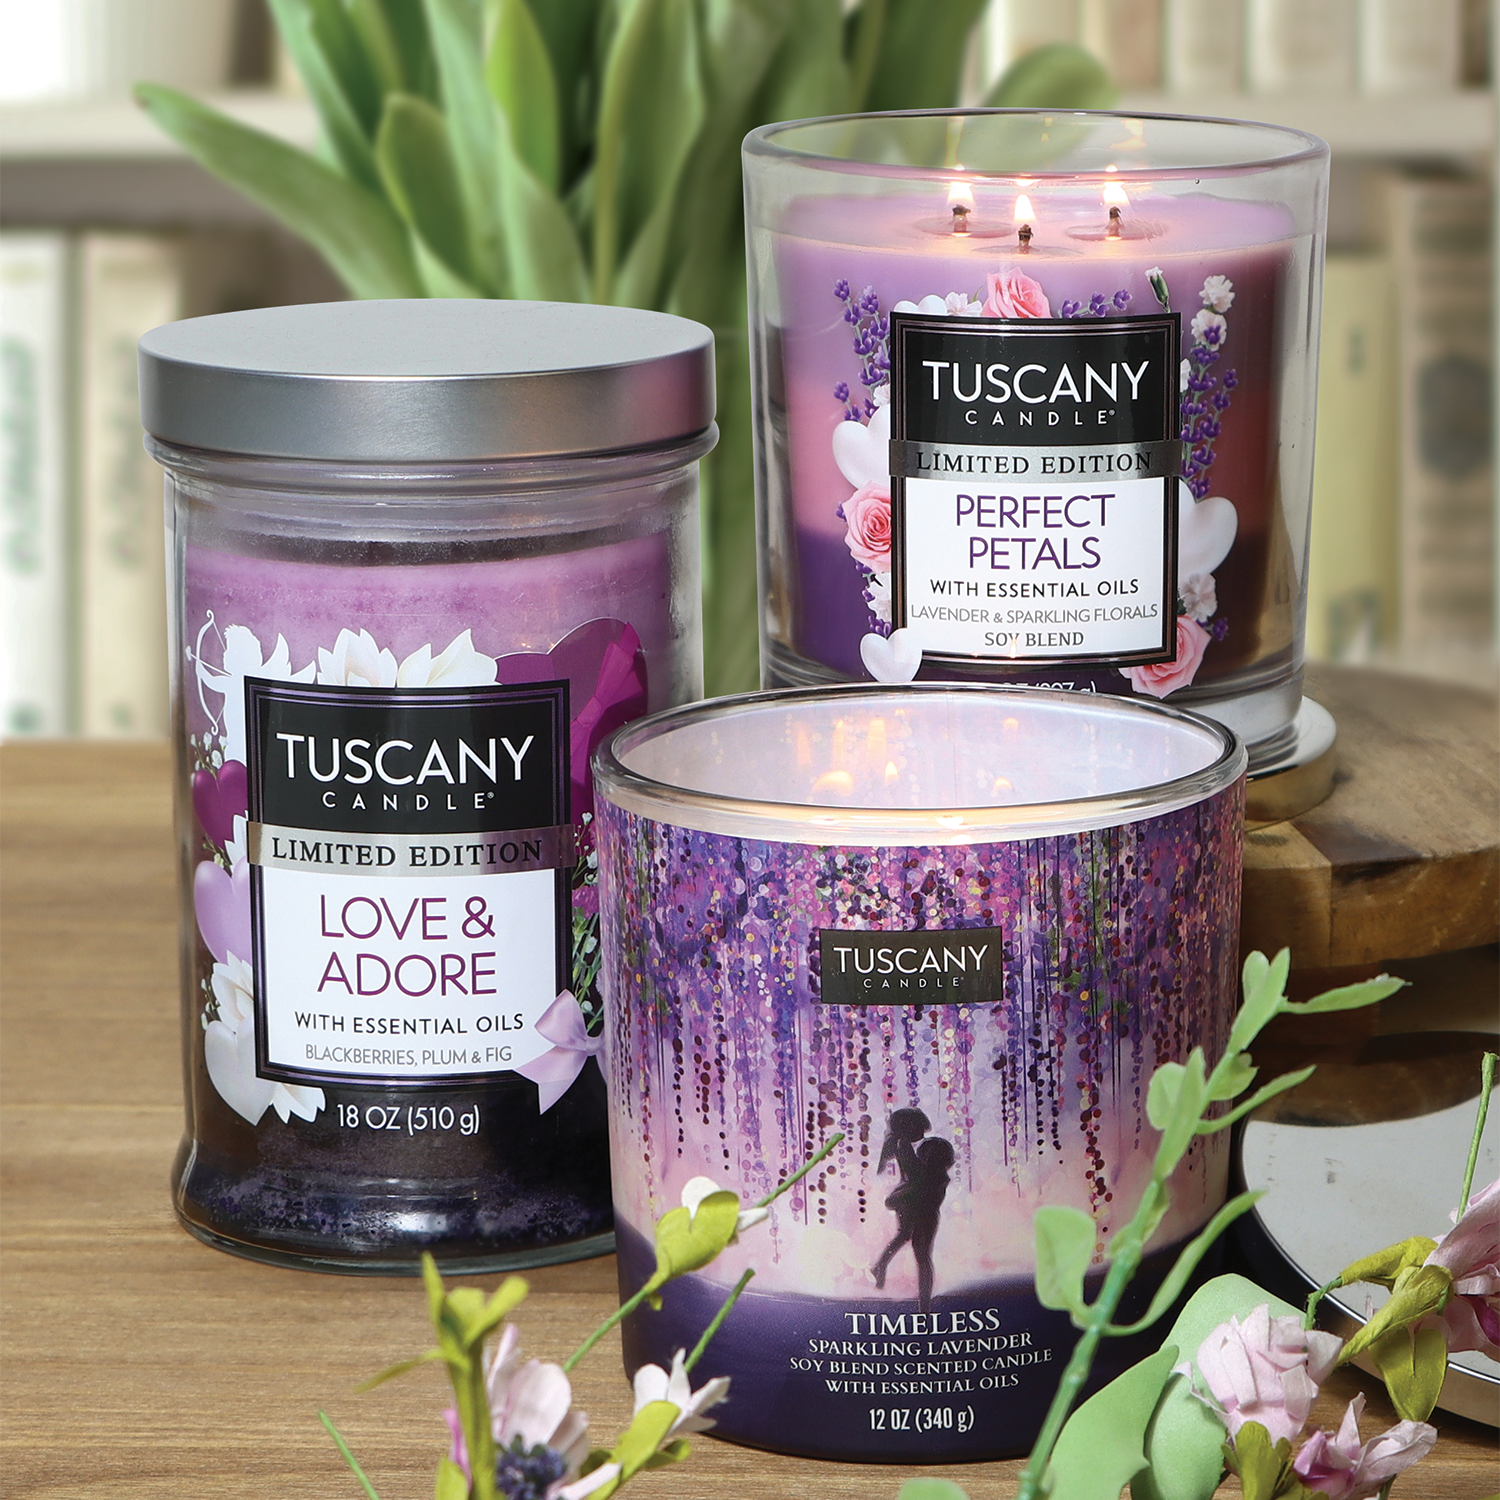 Tuscany Candle® SEASONAL Timeless Scented Jar Candle (12 oz) - Carried Away Collection creates a peaceful atmosphere to promote relaxation and reduce stress. Whether you need to unwind after a long day or prepare for a restful night's sleep, chamomile